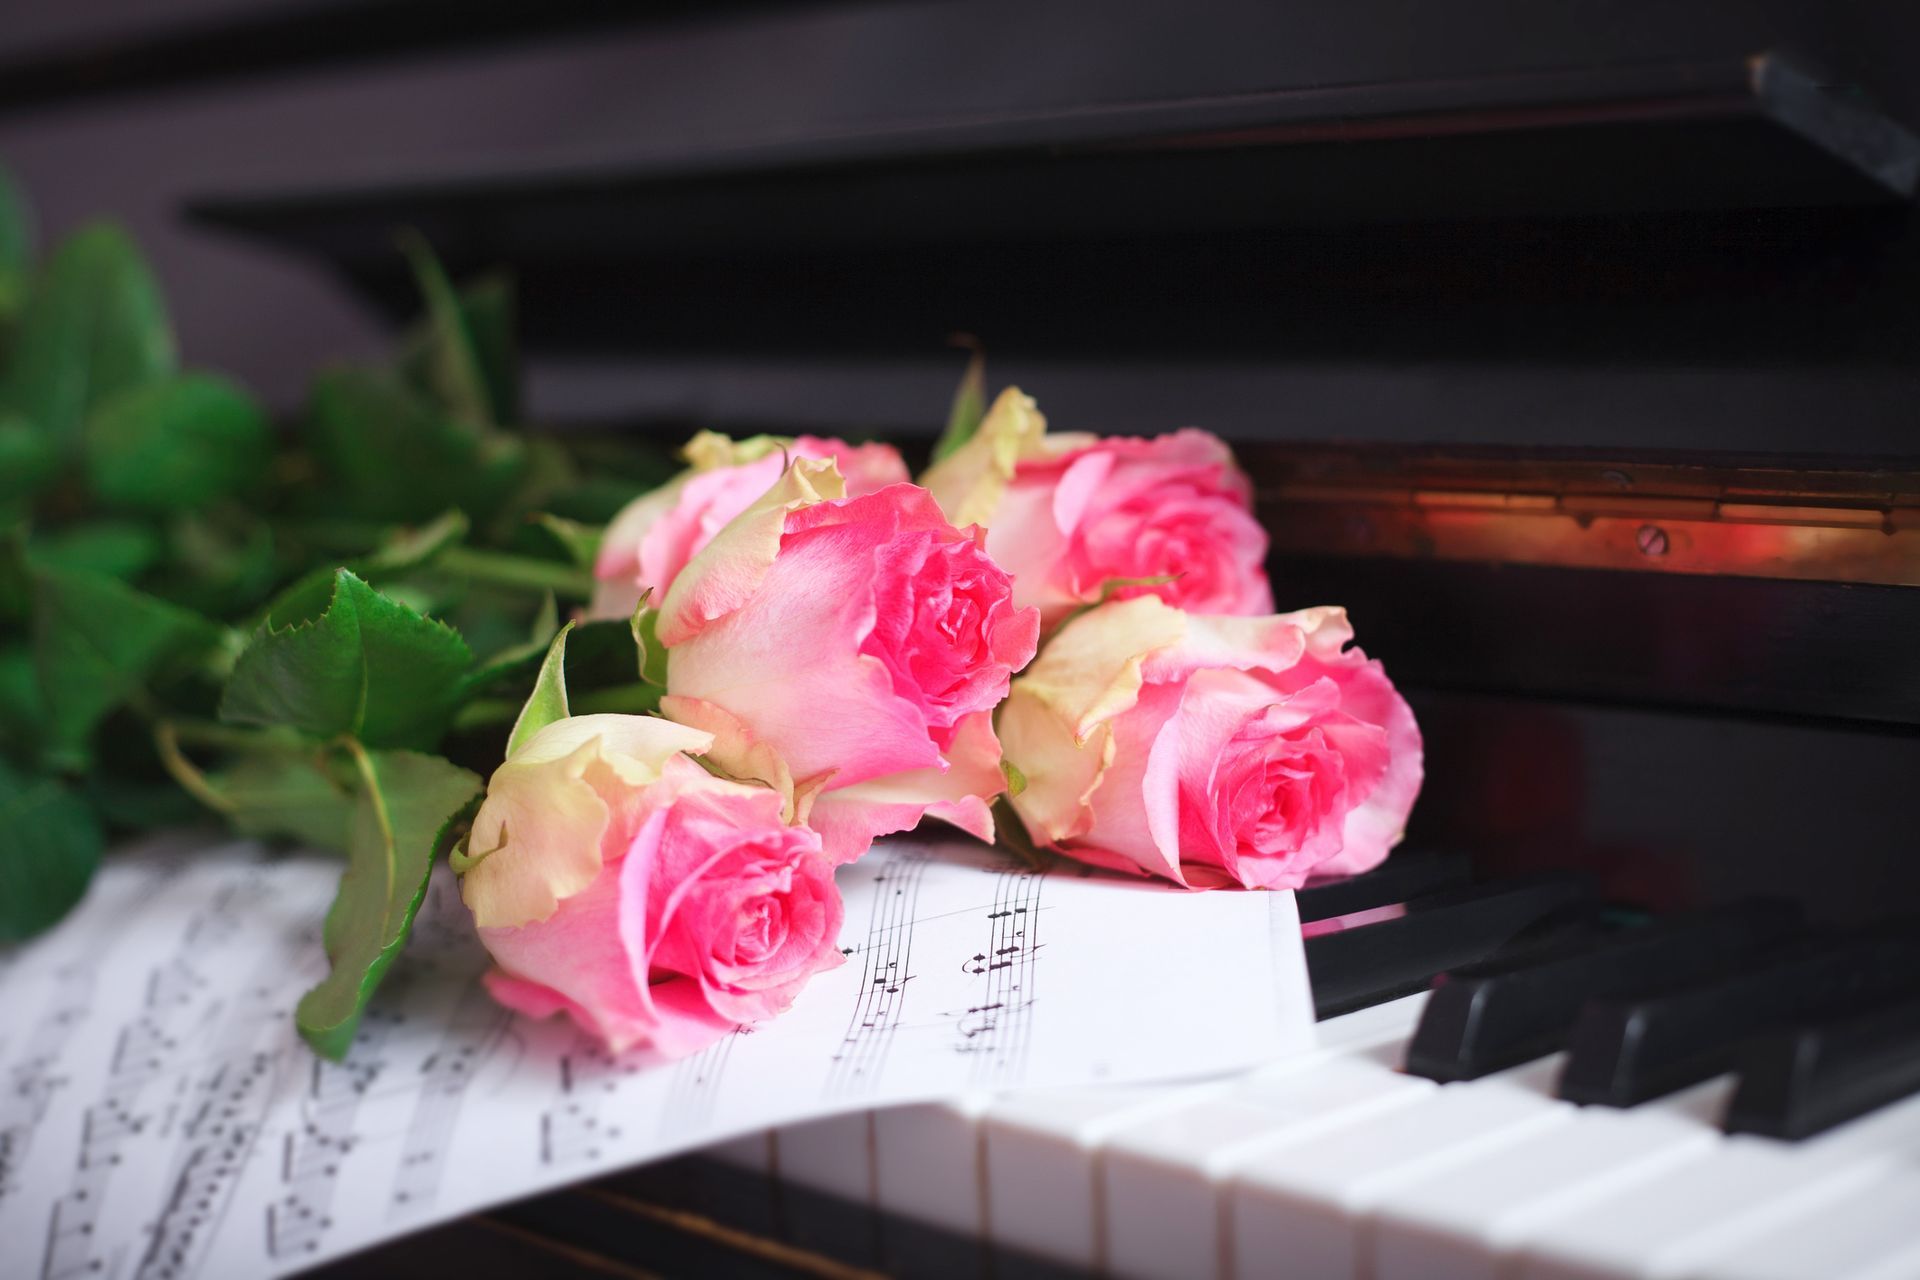 A bouquet of pink roses is sitting on top of a piano keyboard.